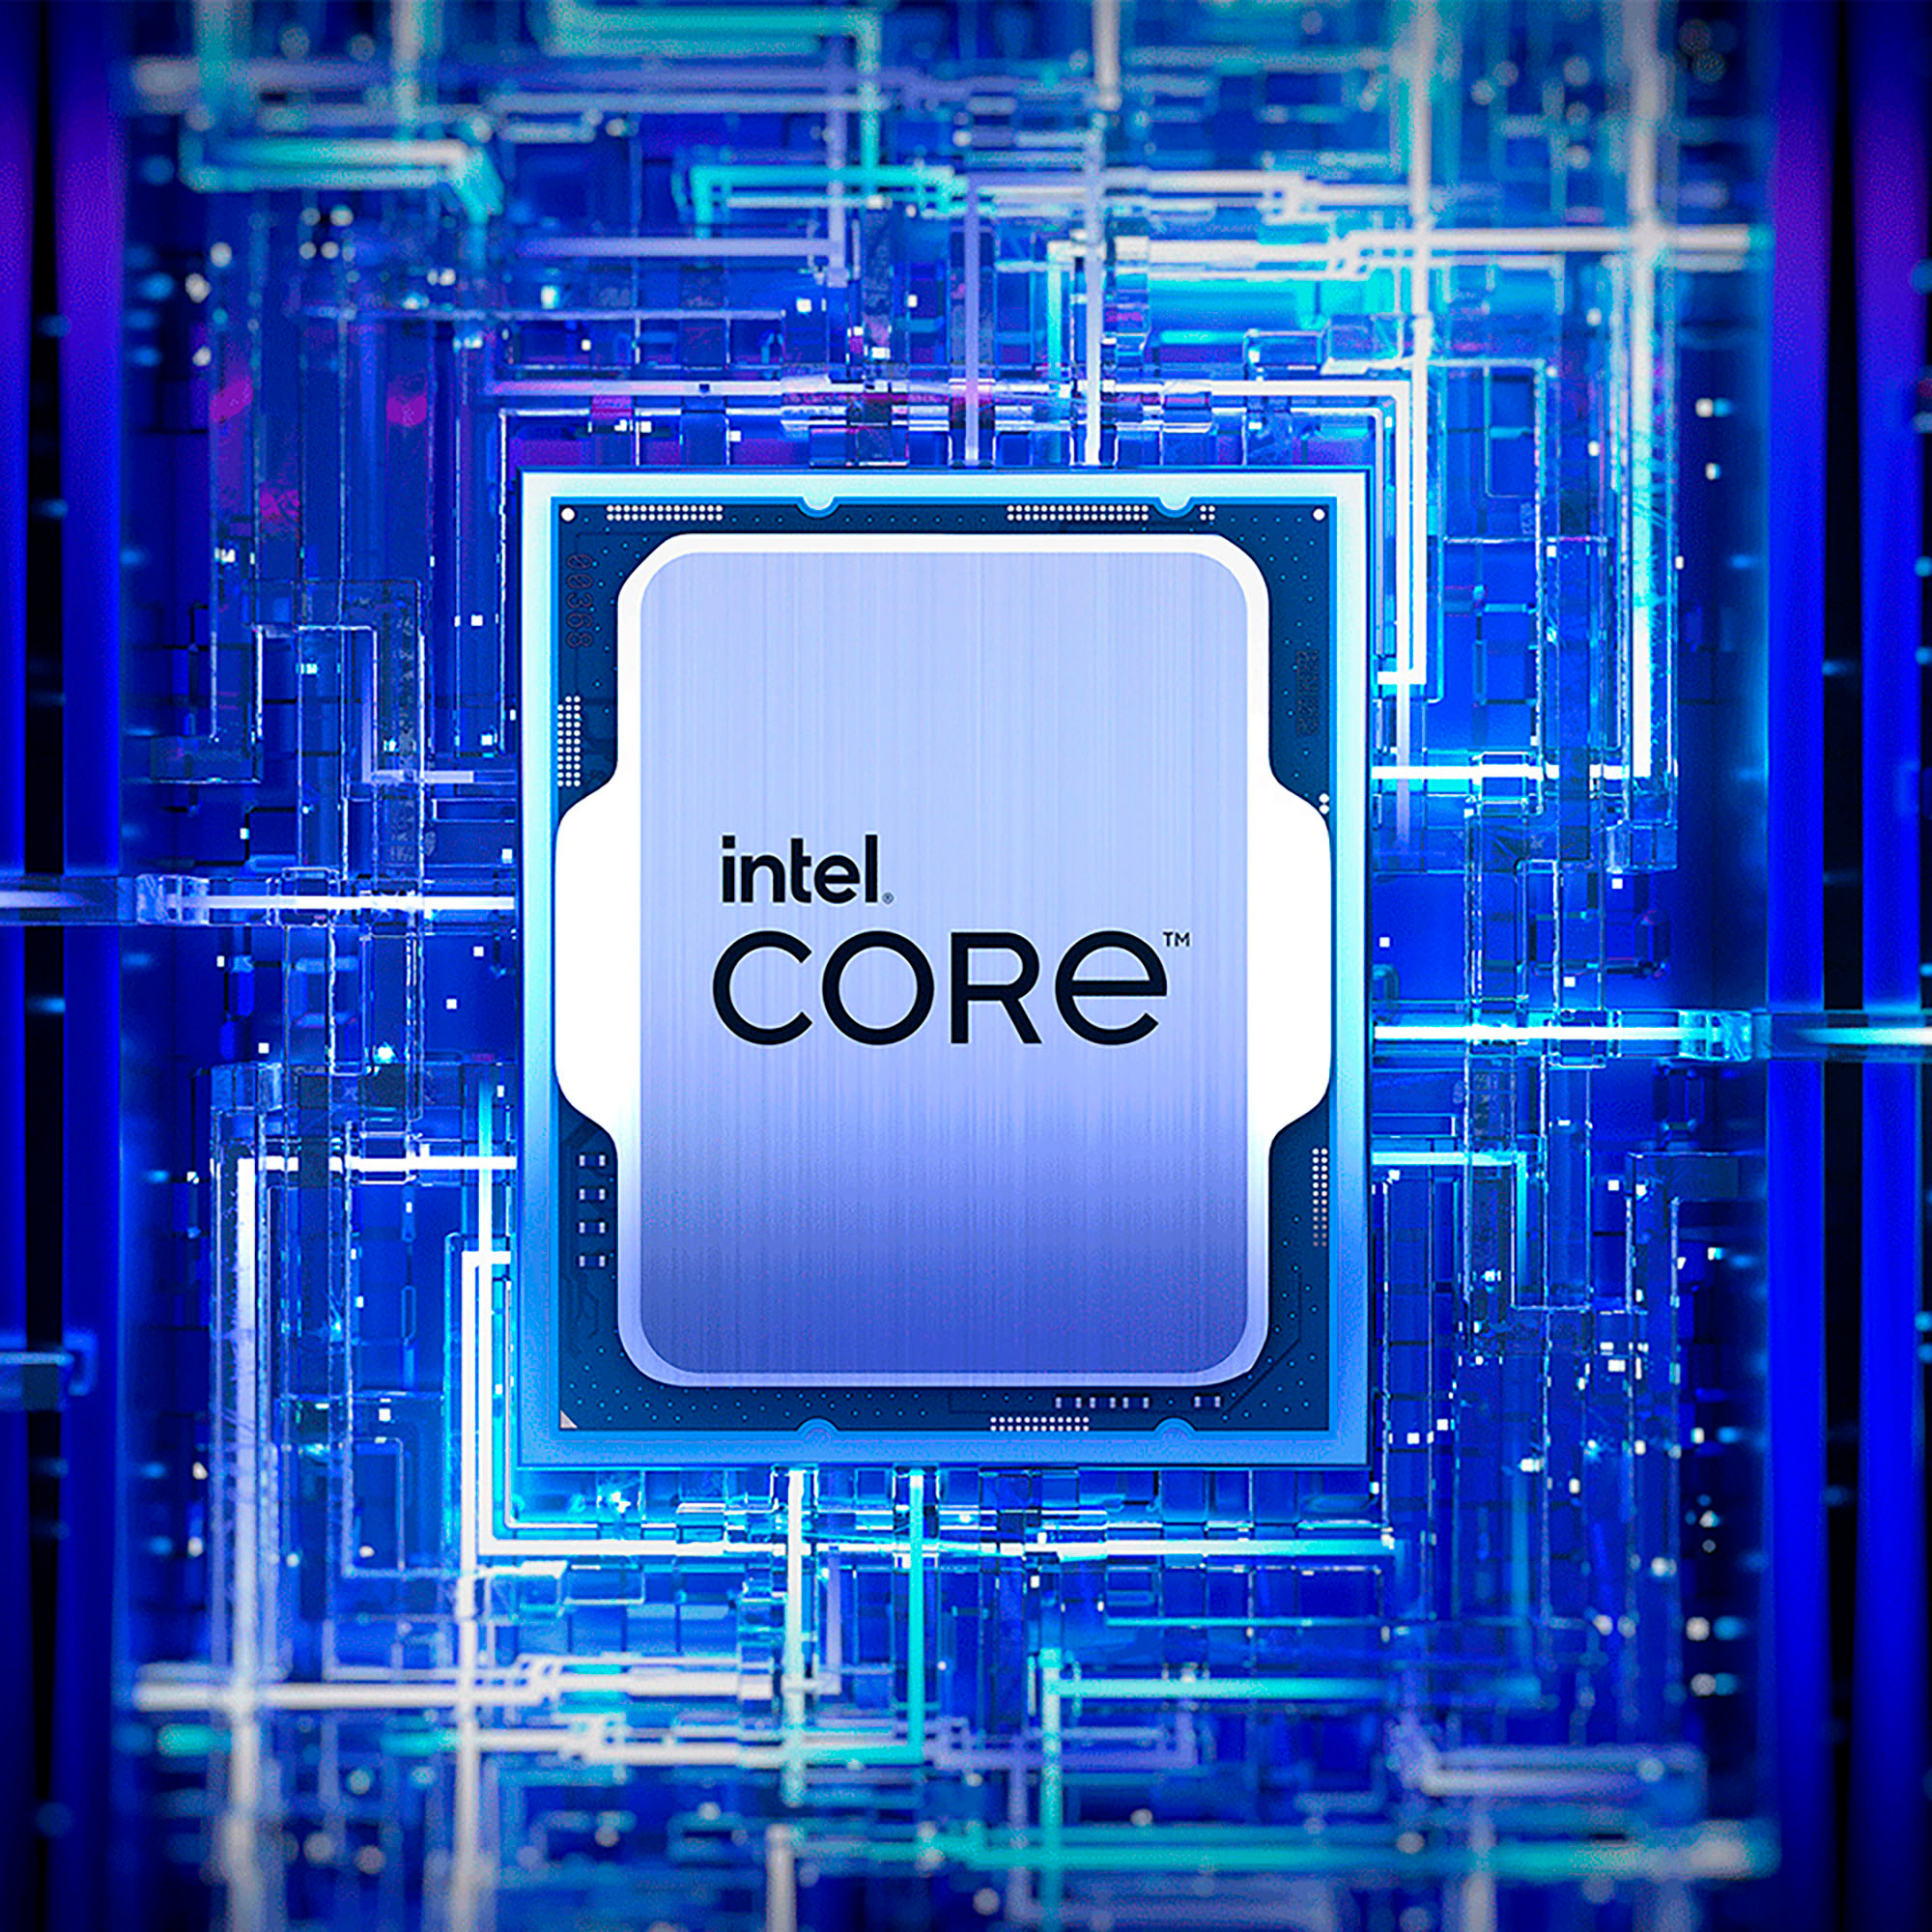 Intel Core i5-13500 offers all-core boost of 4.5 GHz with power